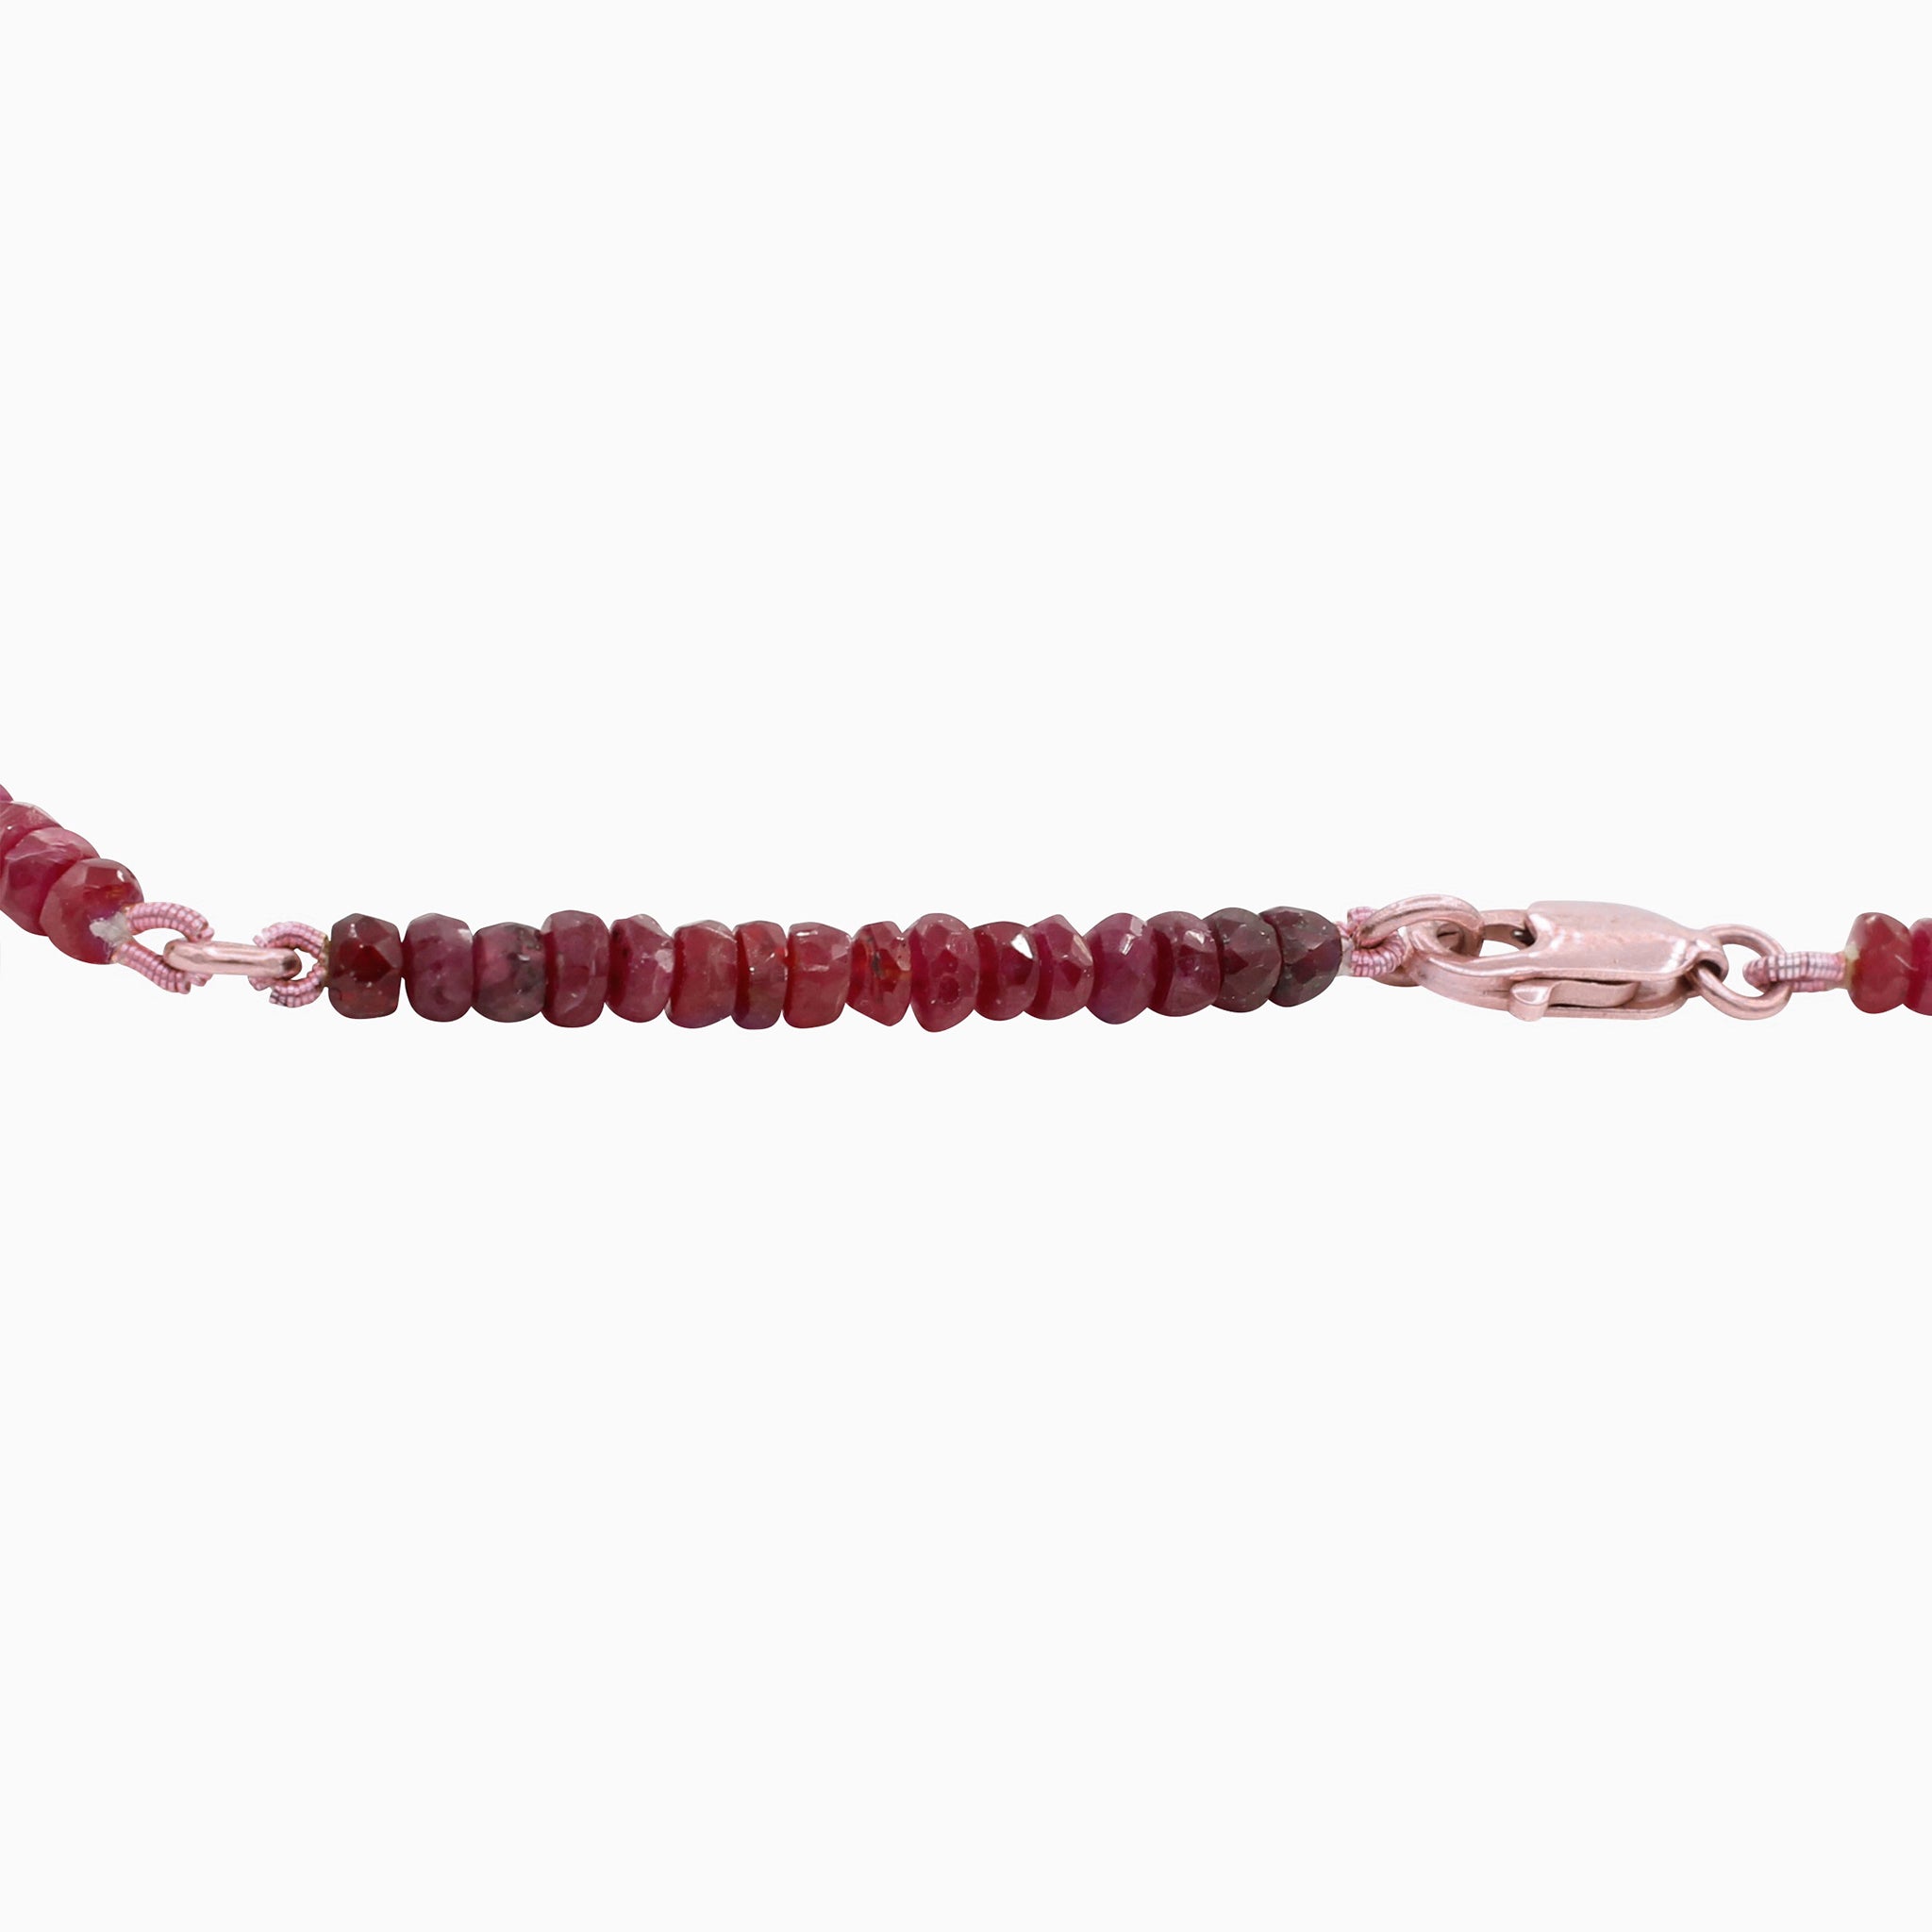 Radiant in Red 40CT Adjustable Ombre Ruby Choker Necklace, 14k Rose Gold Lobster Clasp Closure